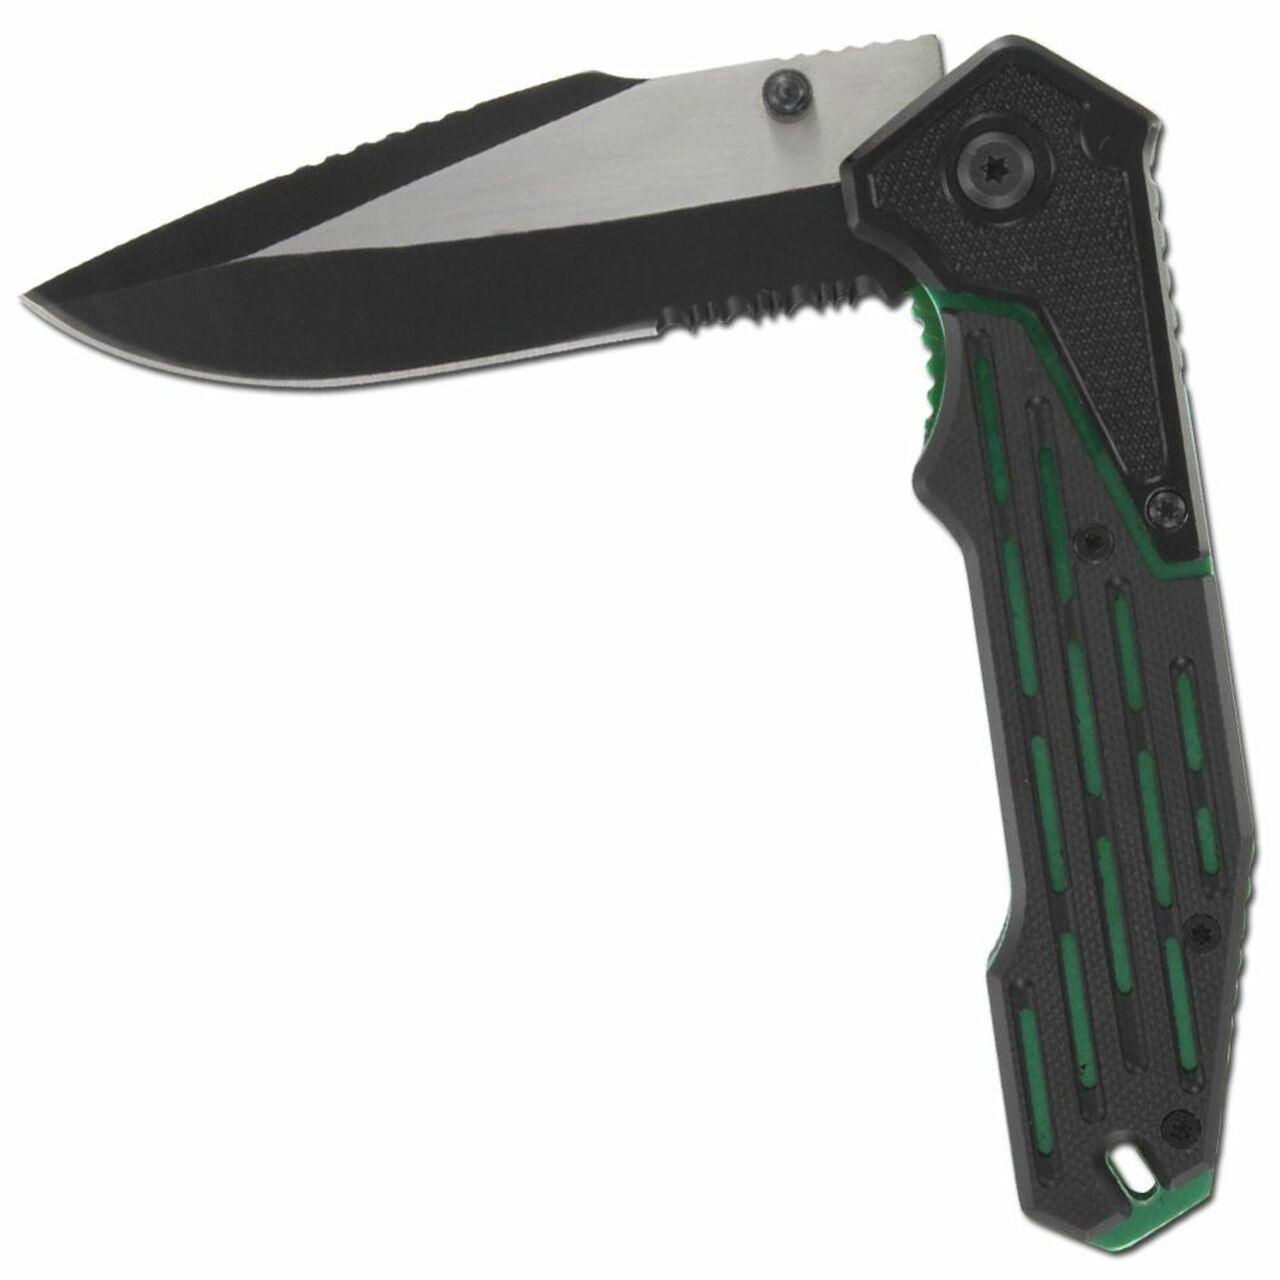 Electrical Charged Green Drop Point Spring Assist Knife-0